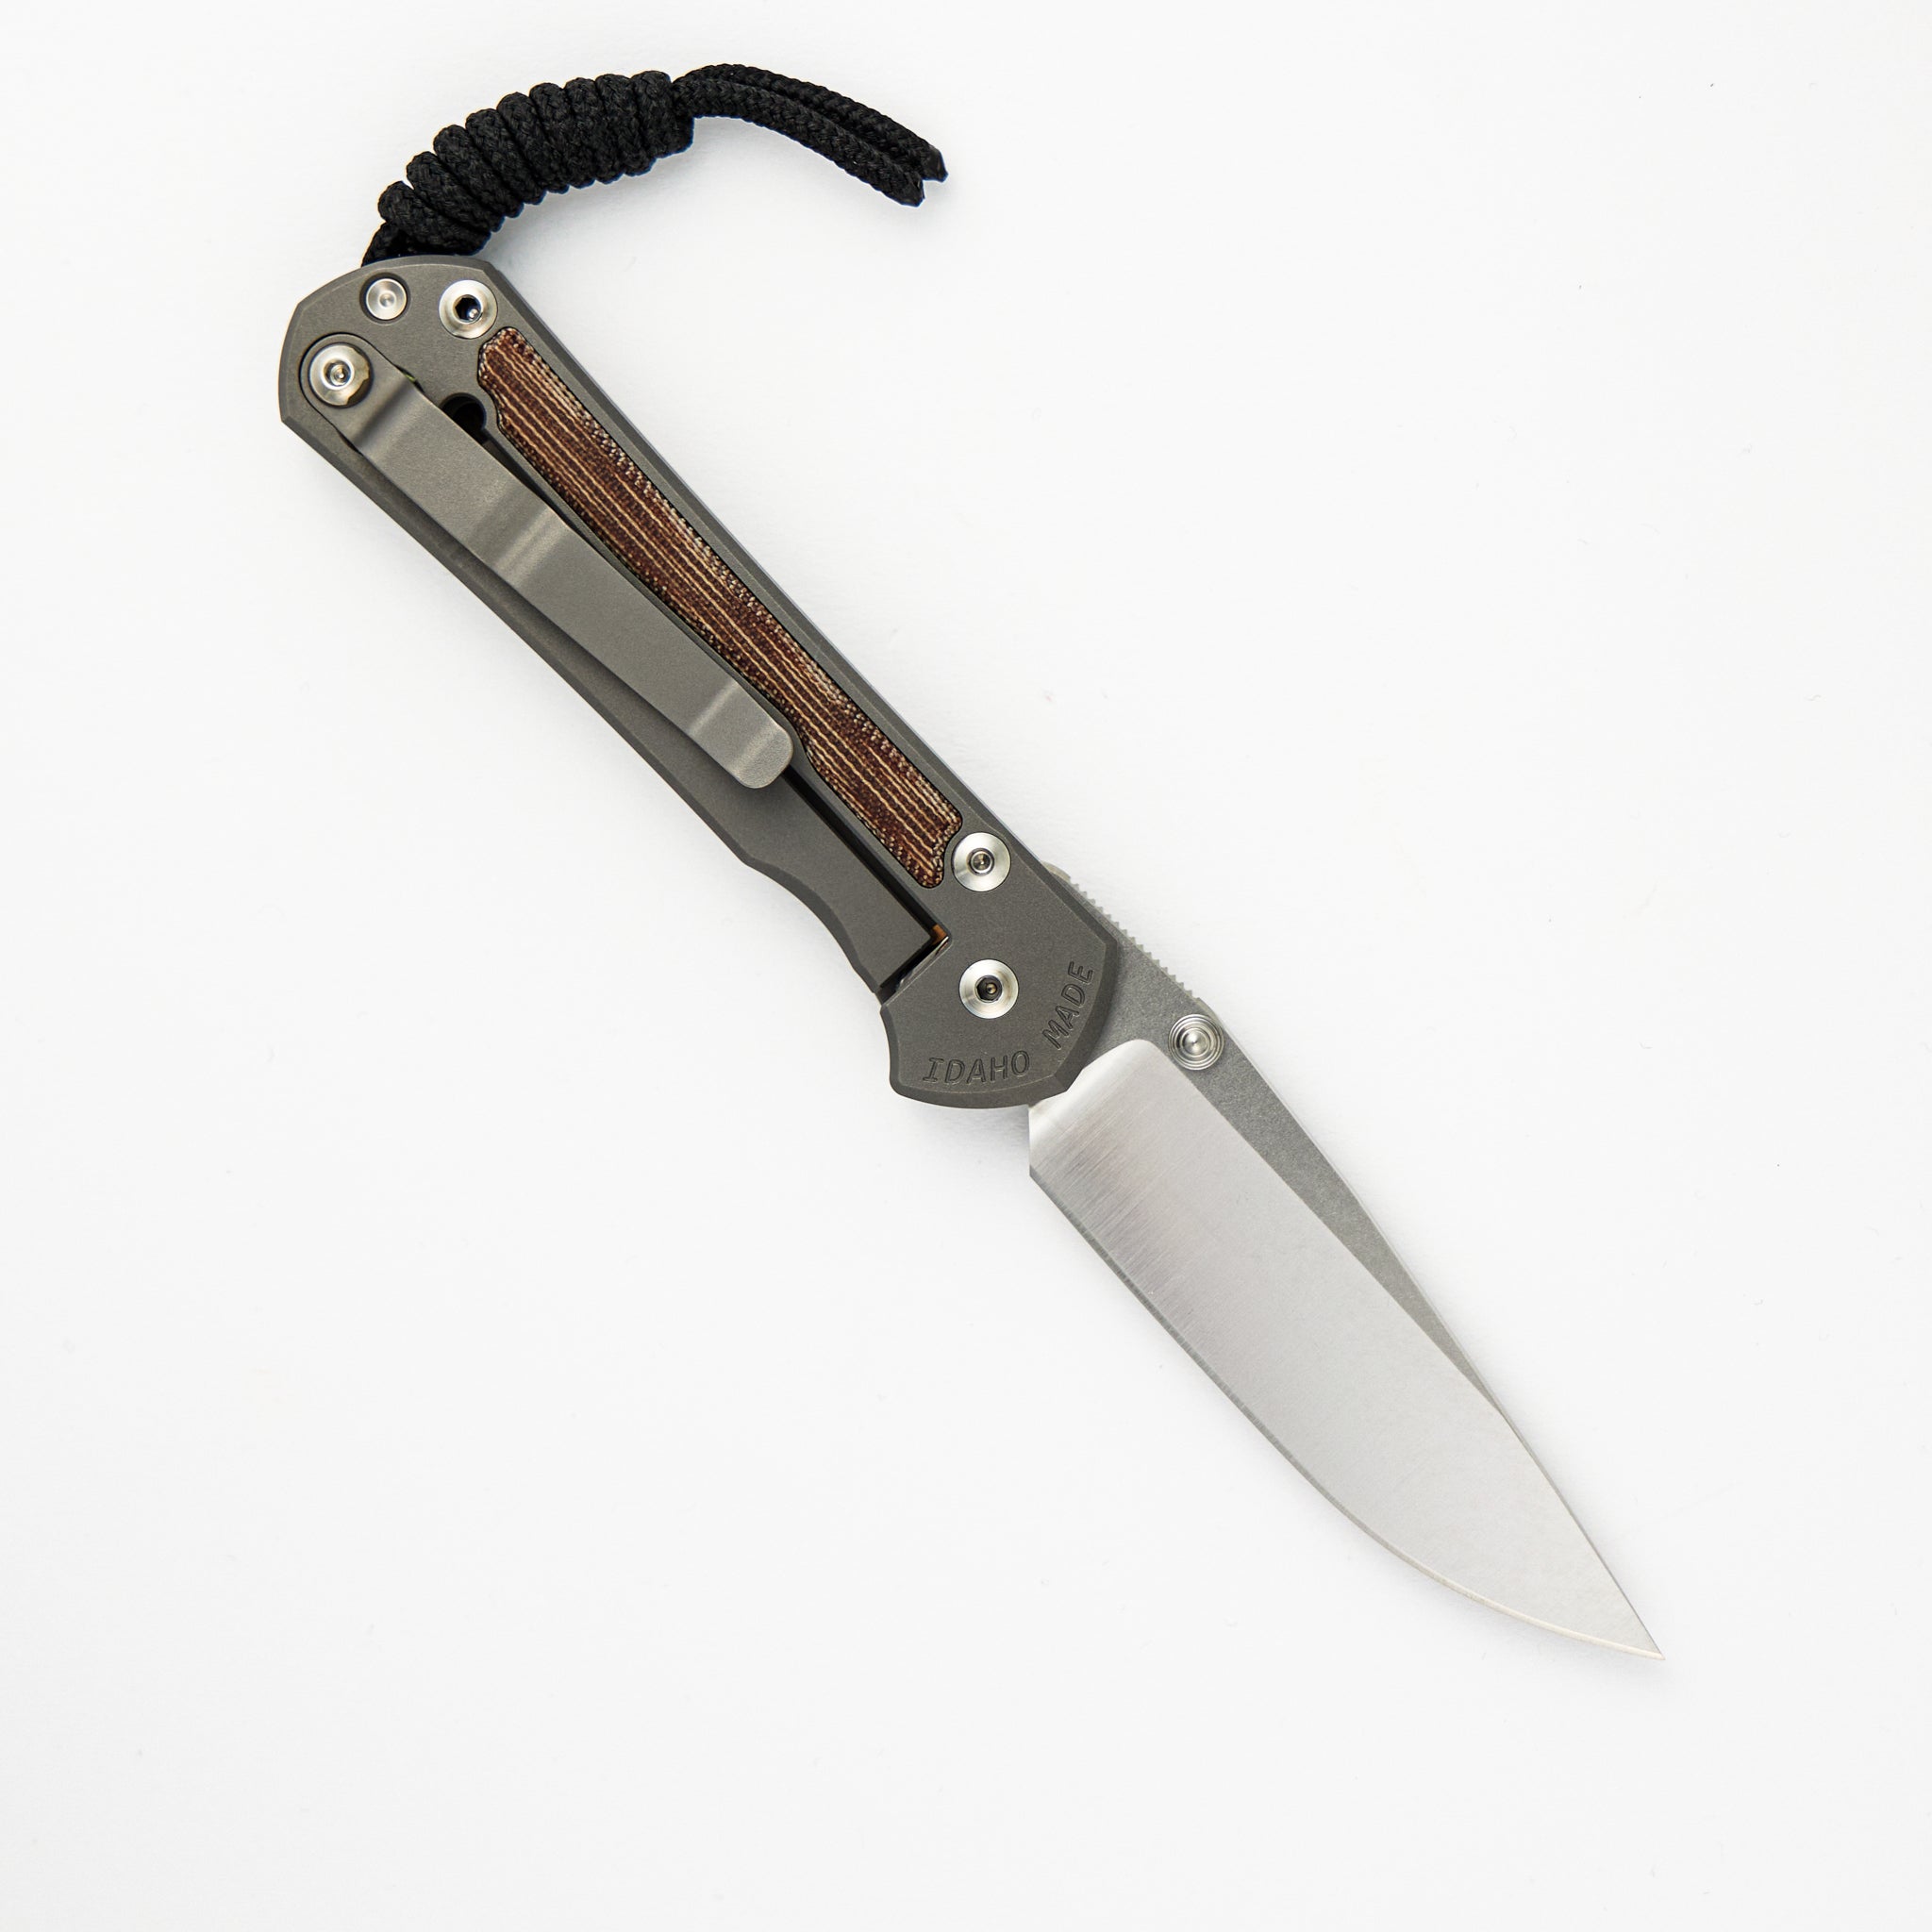 CHRIS REEVE SMALL SEBENZA 31 NATURAL CANVAS MICARTA INLAY – POLISHED CPM MAGNACUT BLADE – GLASS BLASTED – SILVER DOUBLE THUMB LUGS